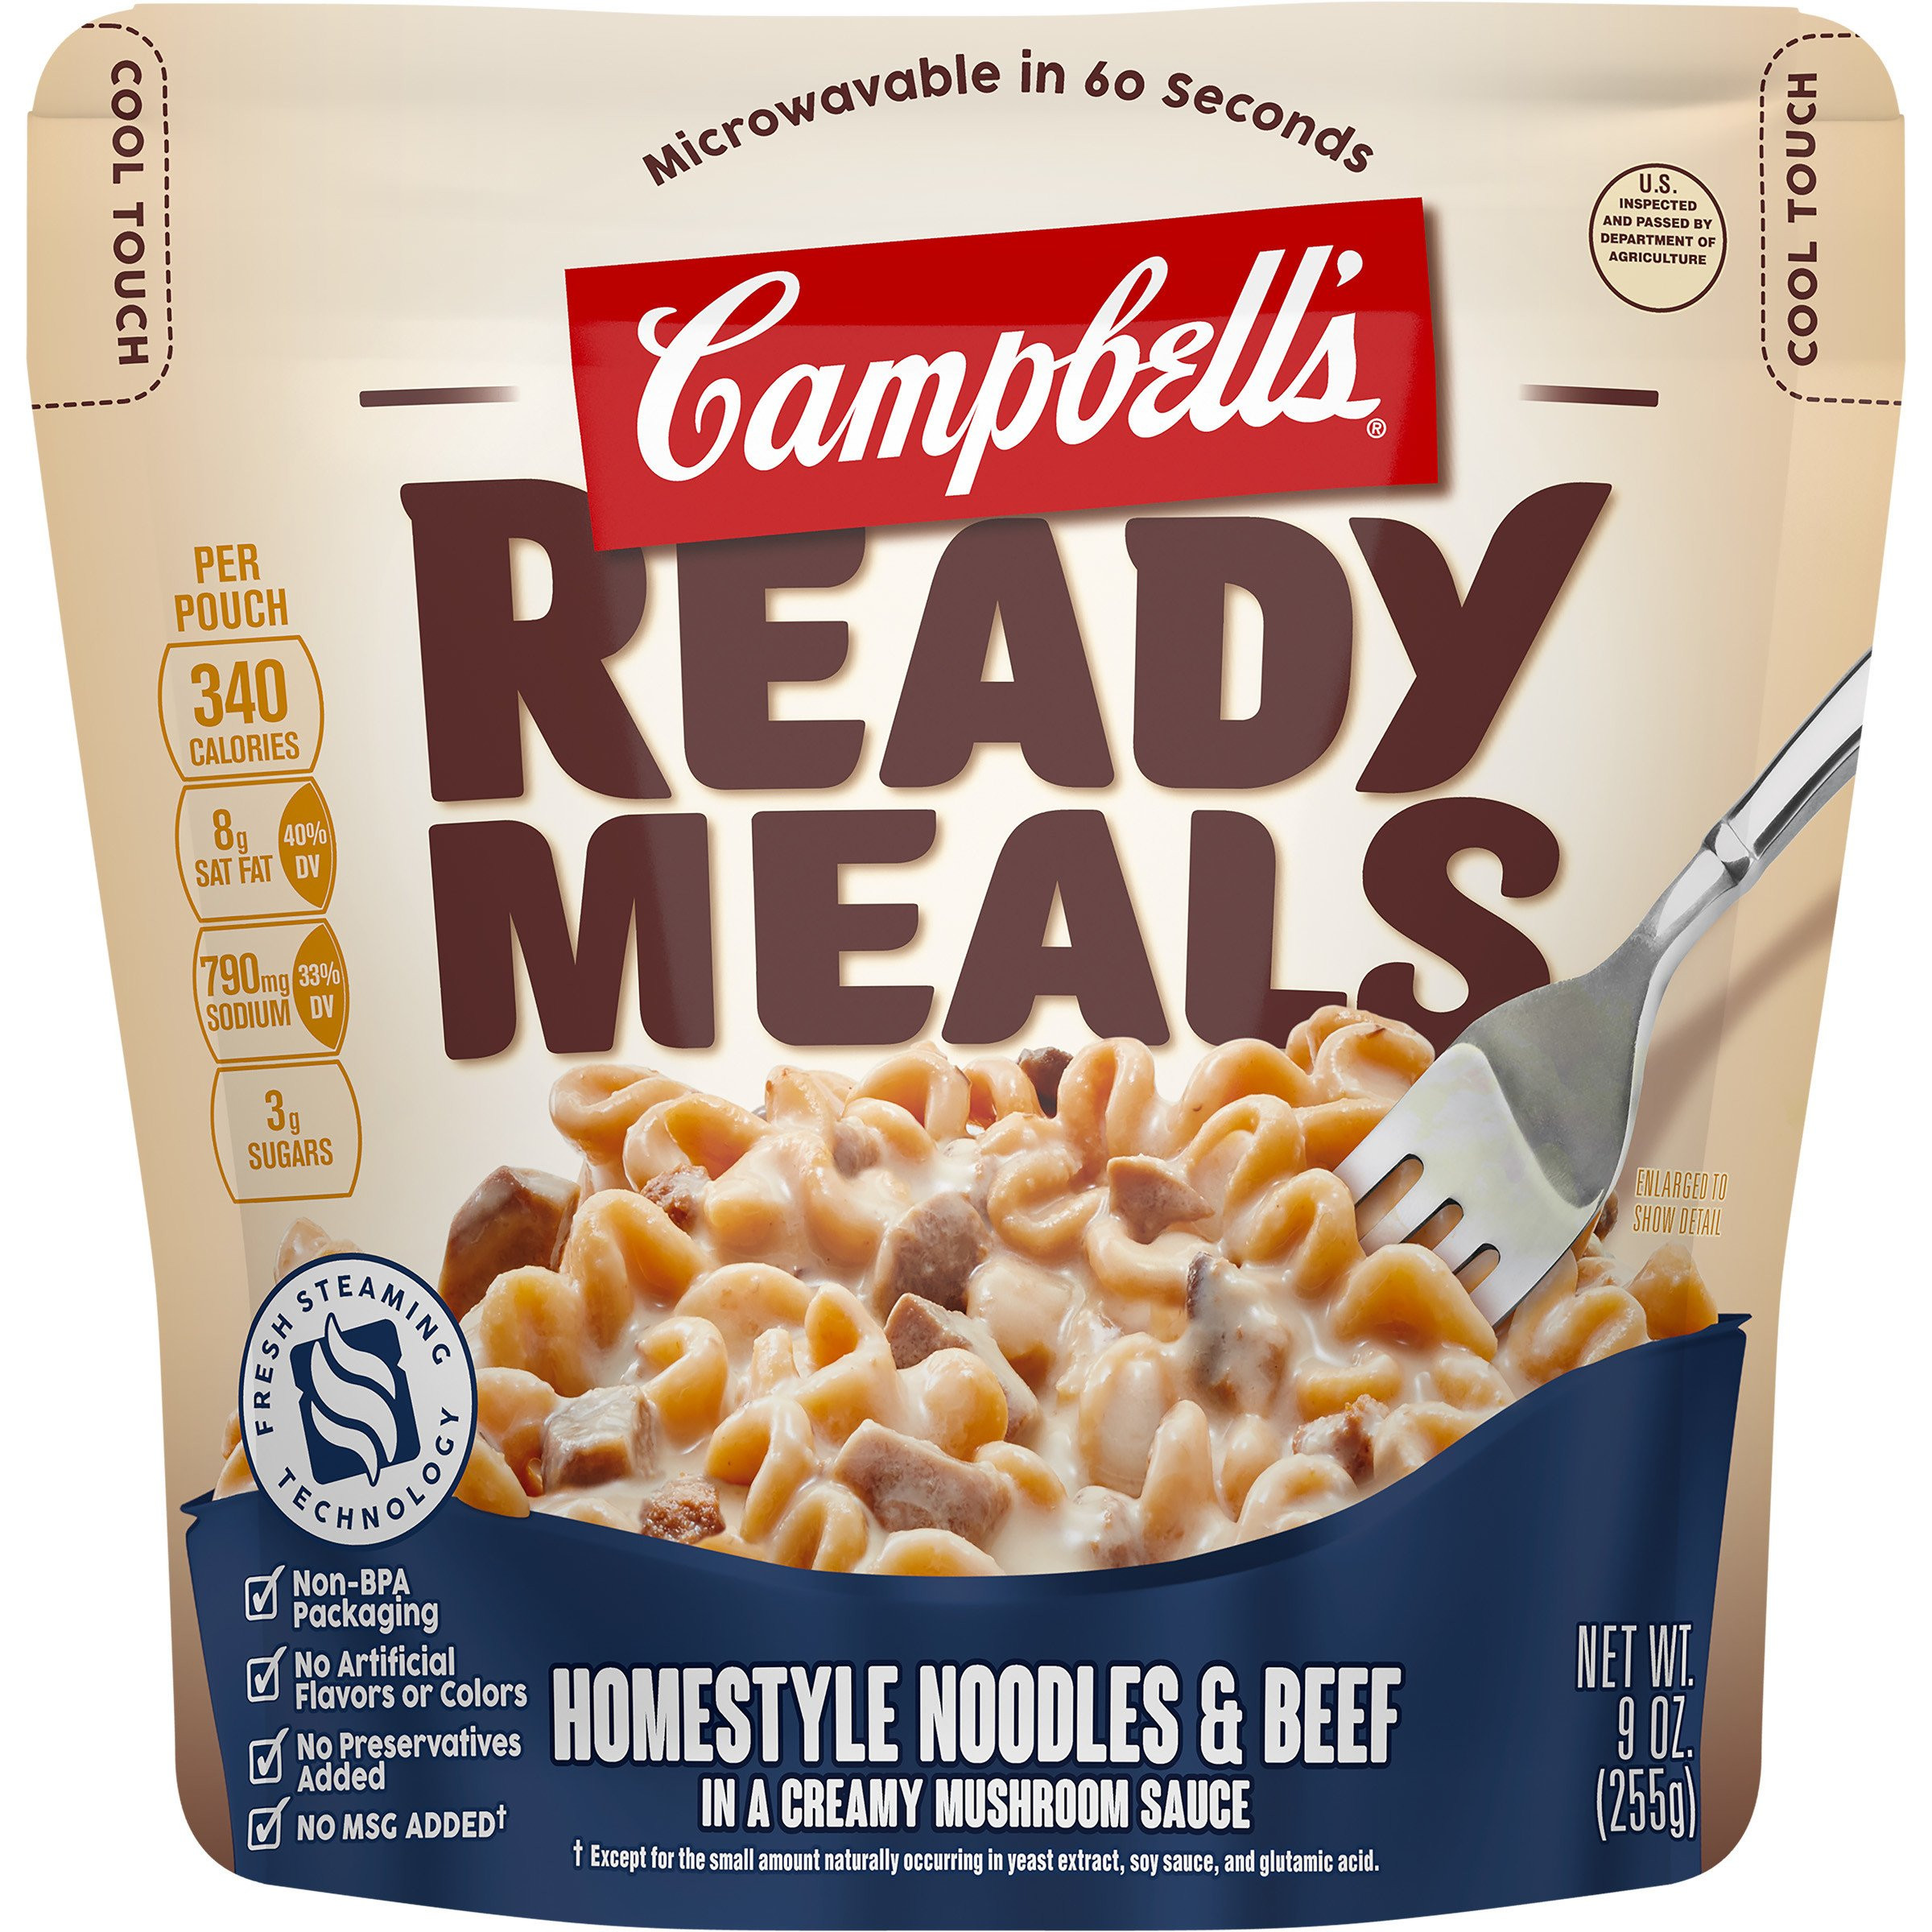 Cup Noodles Homestyle
 Amazon Hormel pleats Meals Variety Flavors 6